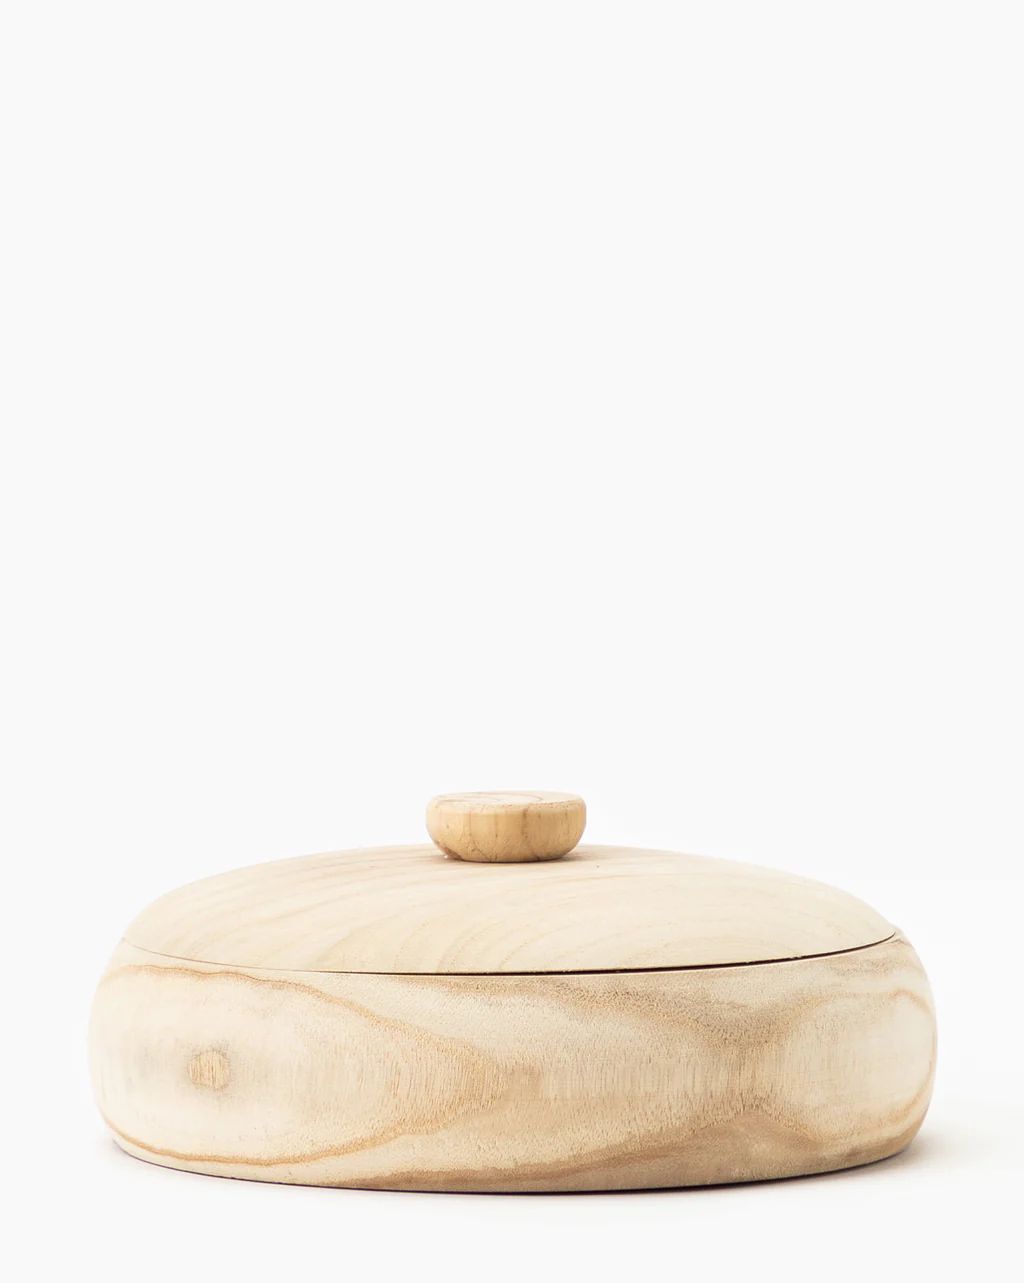 Lidded Natural Wood Container | McGee & Co.